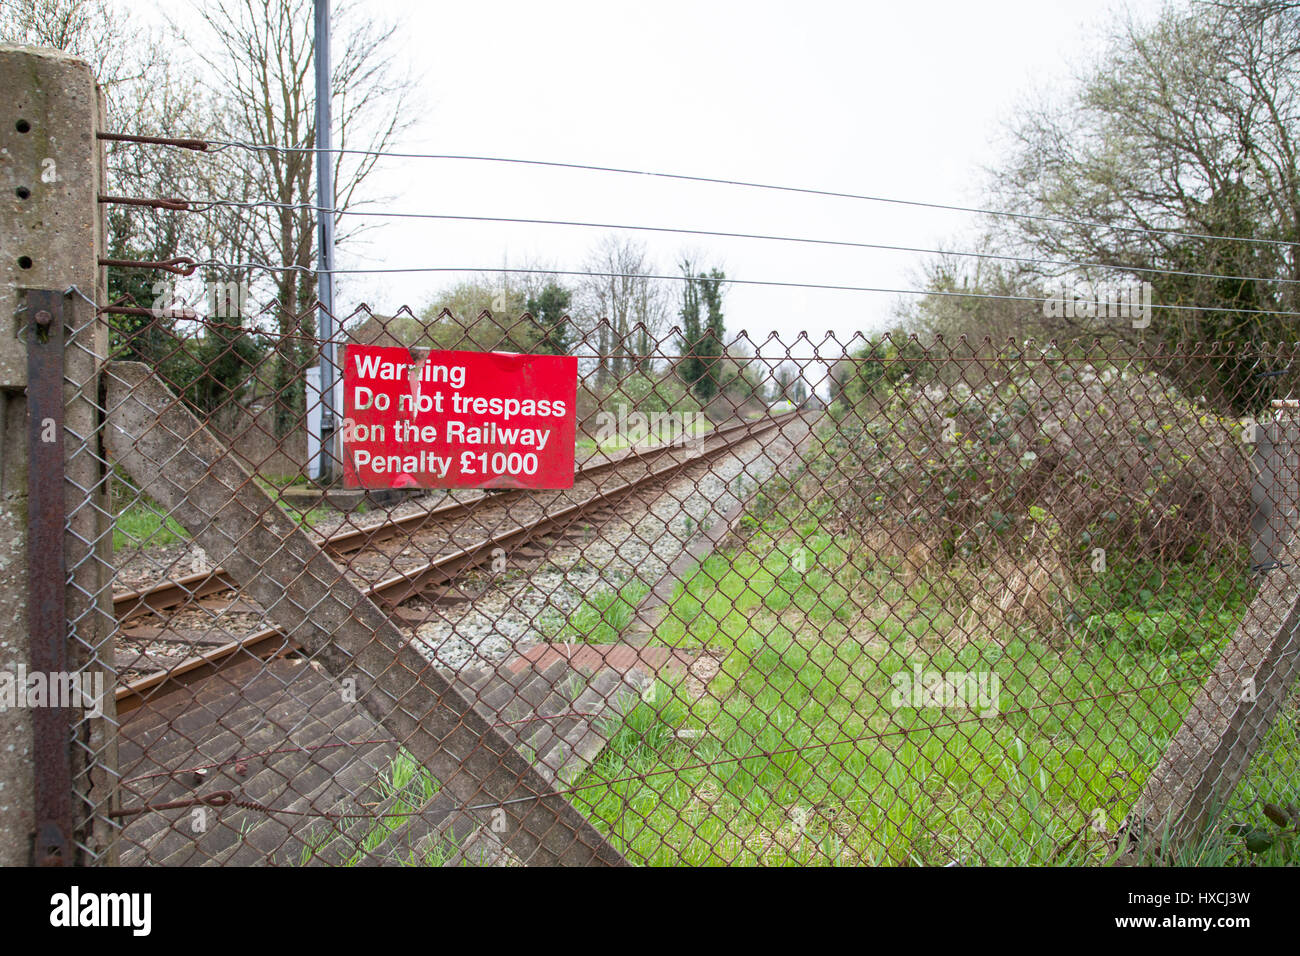 warning do not trespass on the railway penalty £1000 sign hanging on steel wire fencing with railway tracks in the background, uk Stock Photo